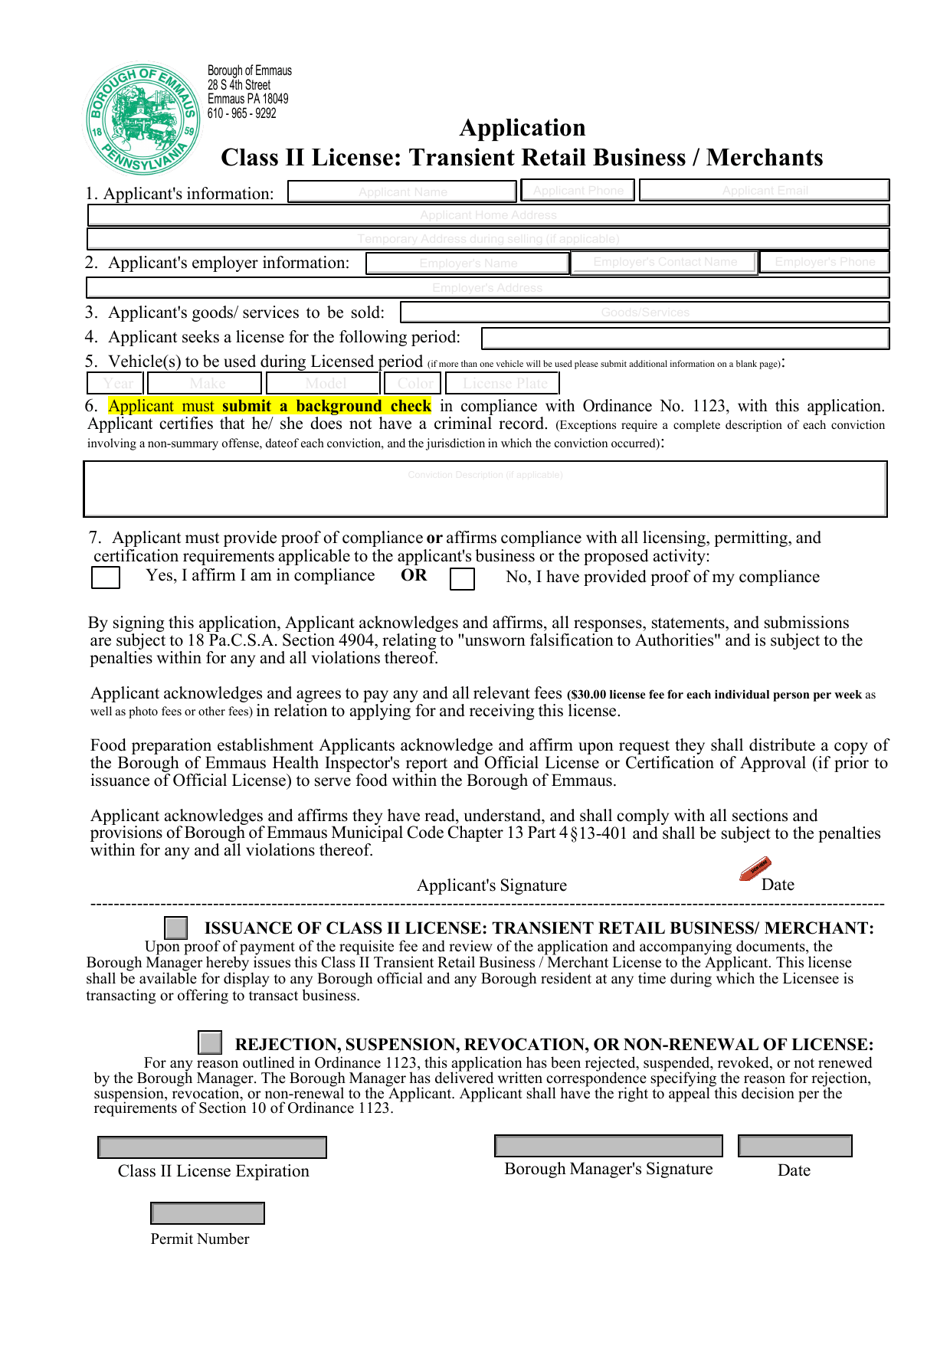 Application for Class II License: Transient Retail Business / Merchants - Borough of Emmaus, Pennsylvania, Page 1